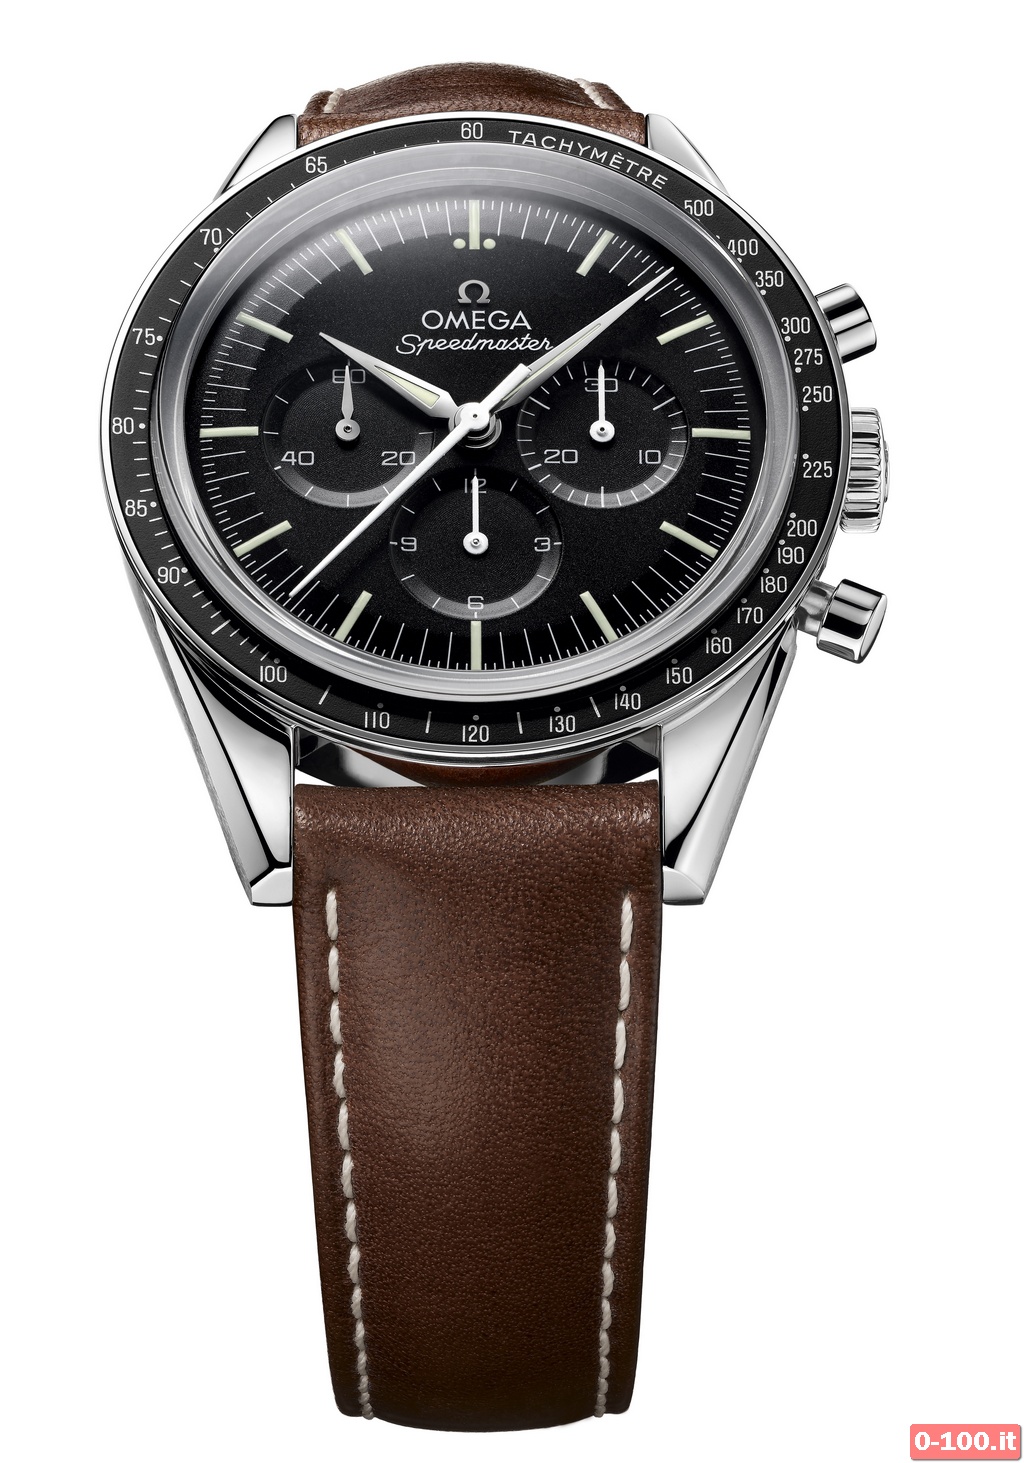 omega_speedmaster_first_omega_in-space_0-100_2